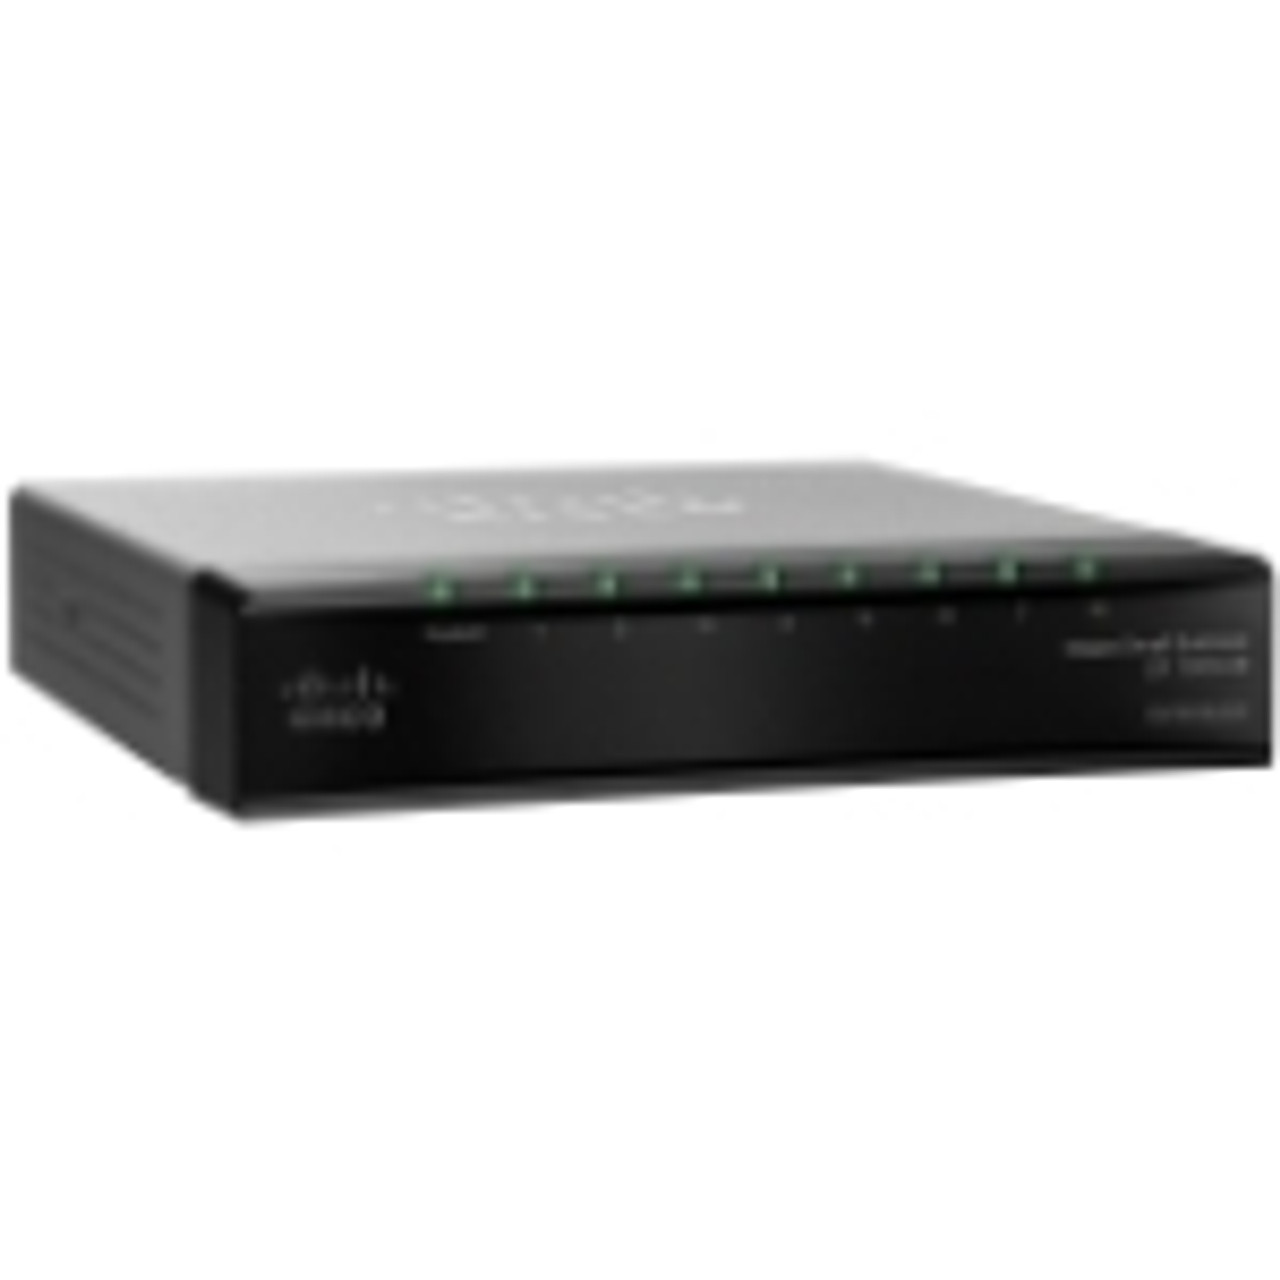 SF100D-08-AU Cisco Unmanaged Desktop Switch 8 Ports 10/100Base-TX Twisted Pair Fast Ethernet 2 Layer Supported Desktop, Wall Mountable (Refurbished)